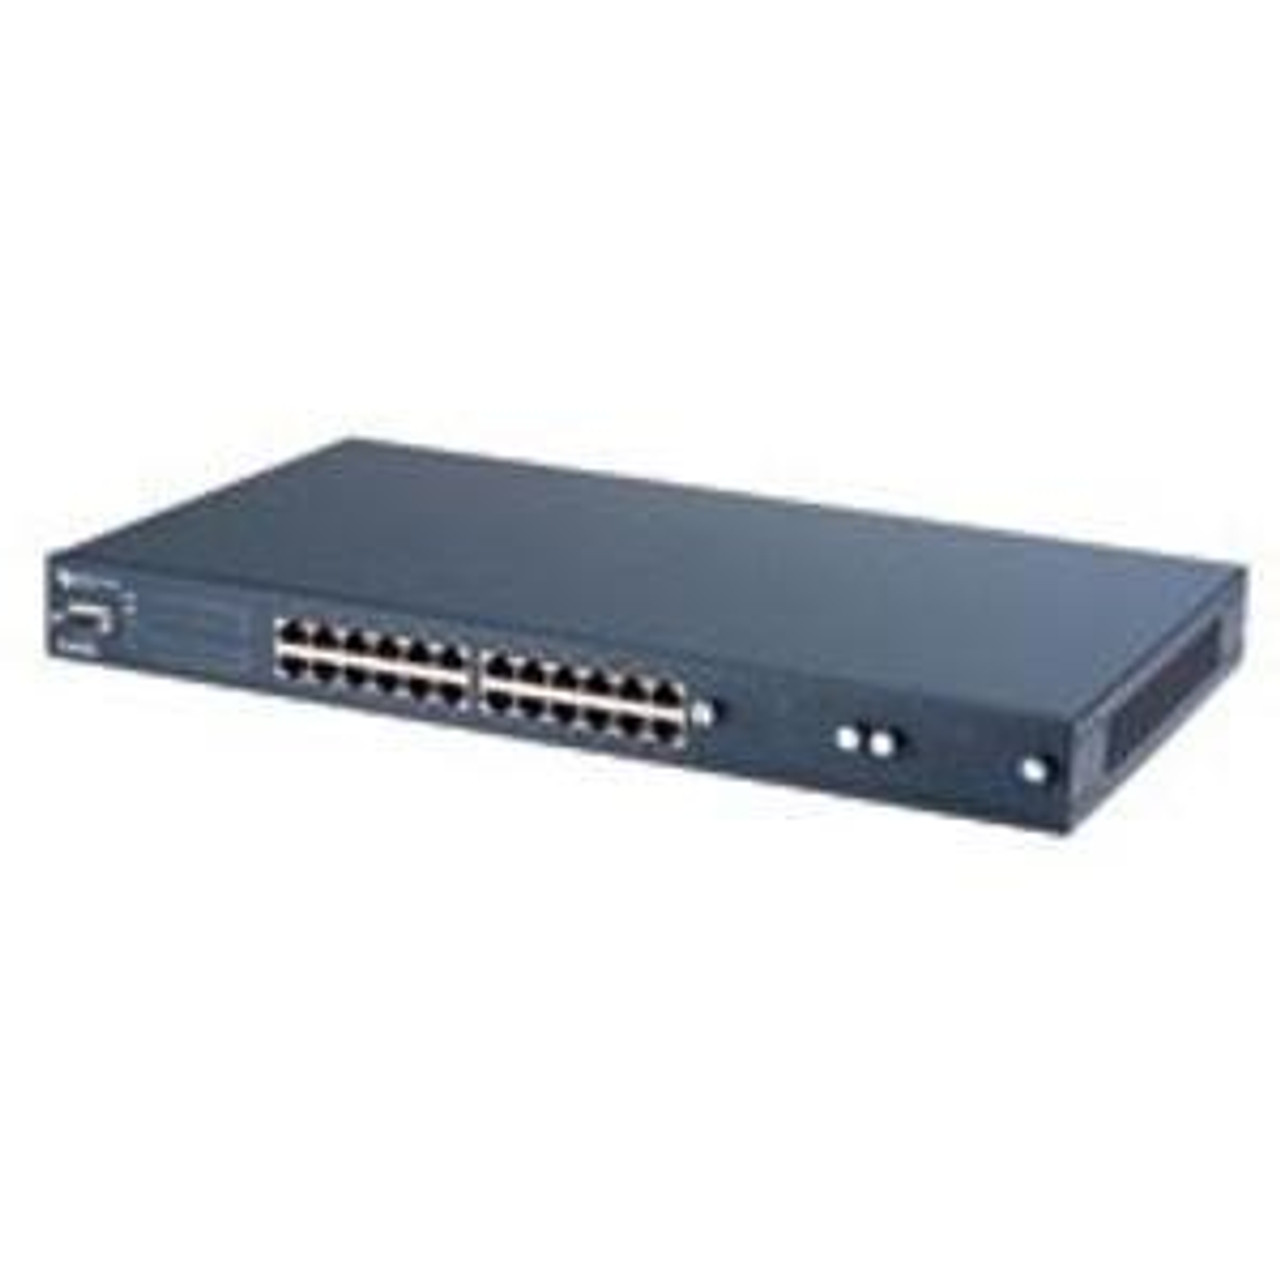 91-010-010002 ZyXEL Communications ES-3024 24-Ports Layer-2 Managed Switch w/Expansion Bays (Refurbished)